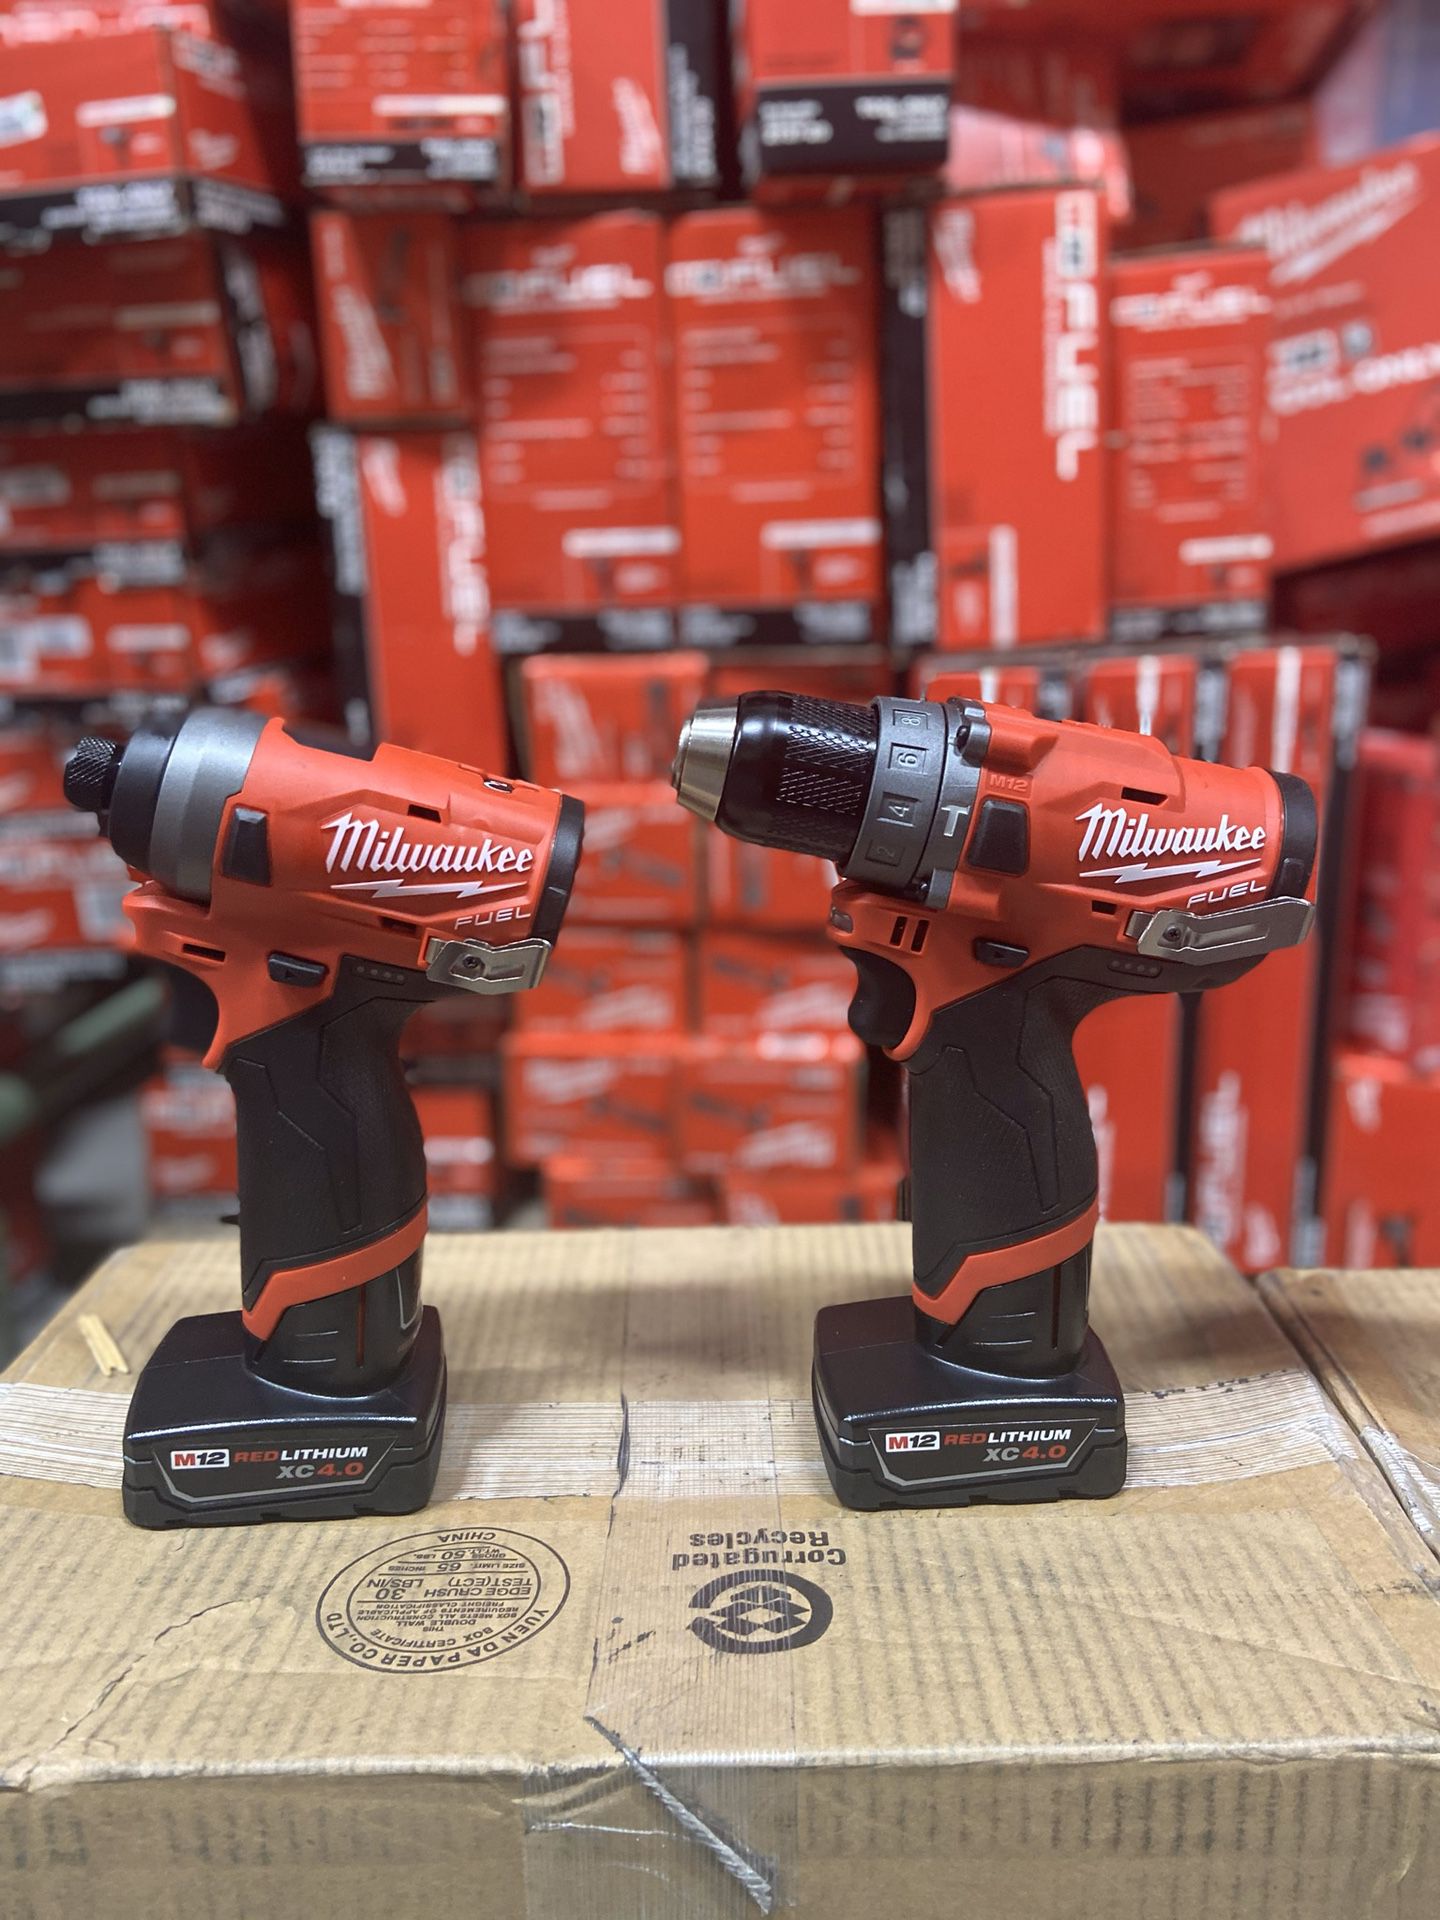 Brand new milwaukee m12 fuel hammer drill and impact driver with 4.0 2553-20 2504-20